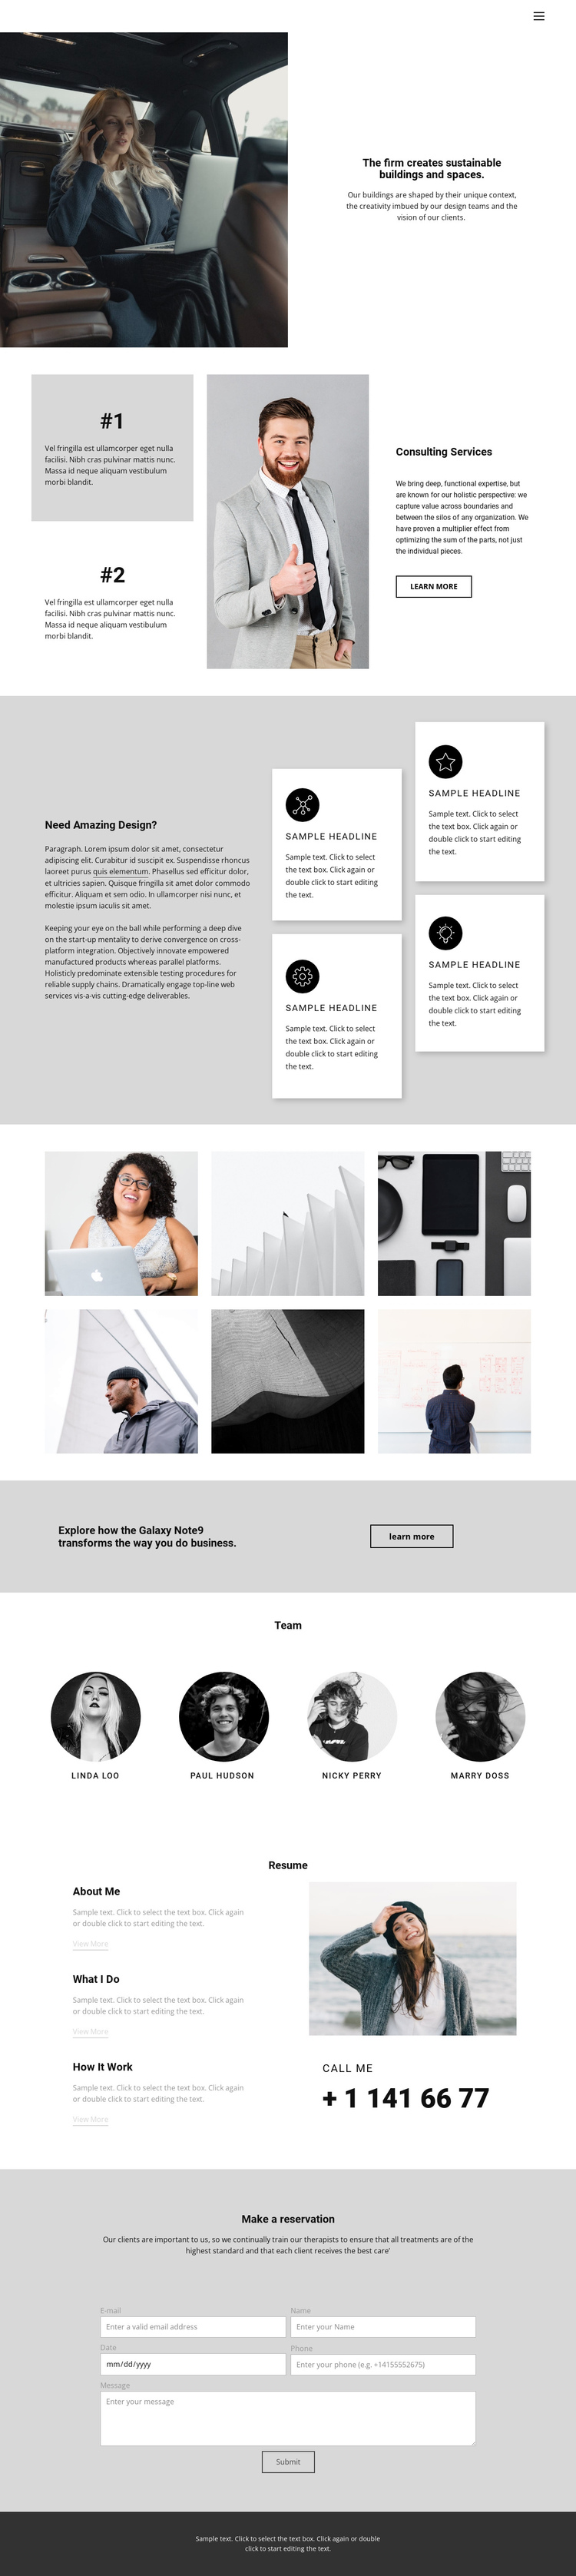 School of Successful Business One Page Template